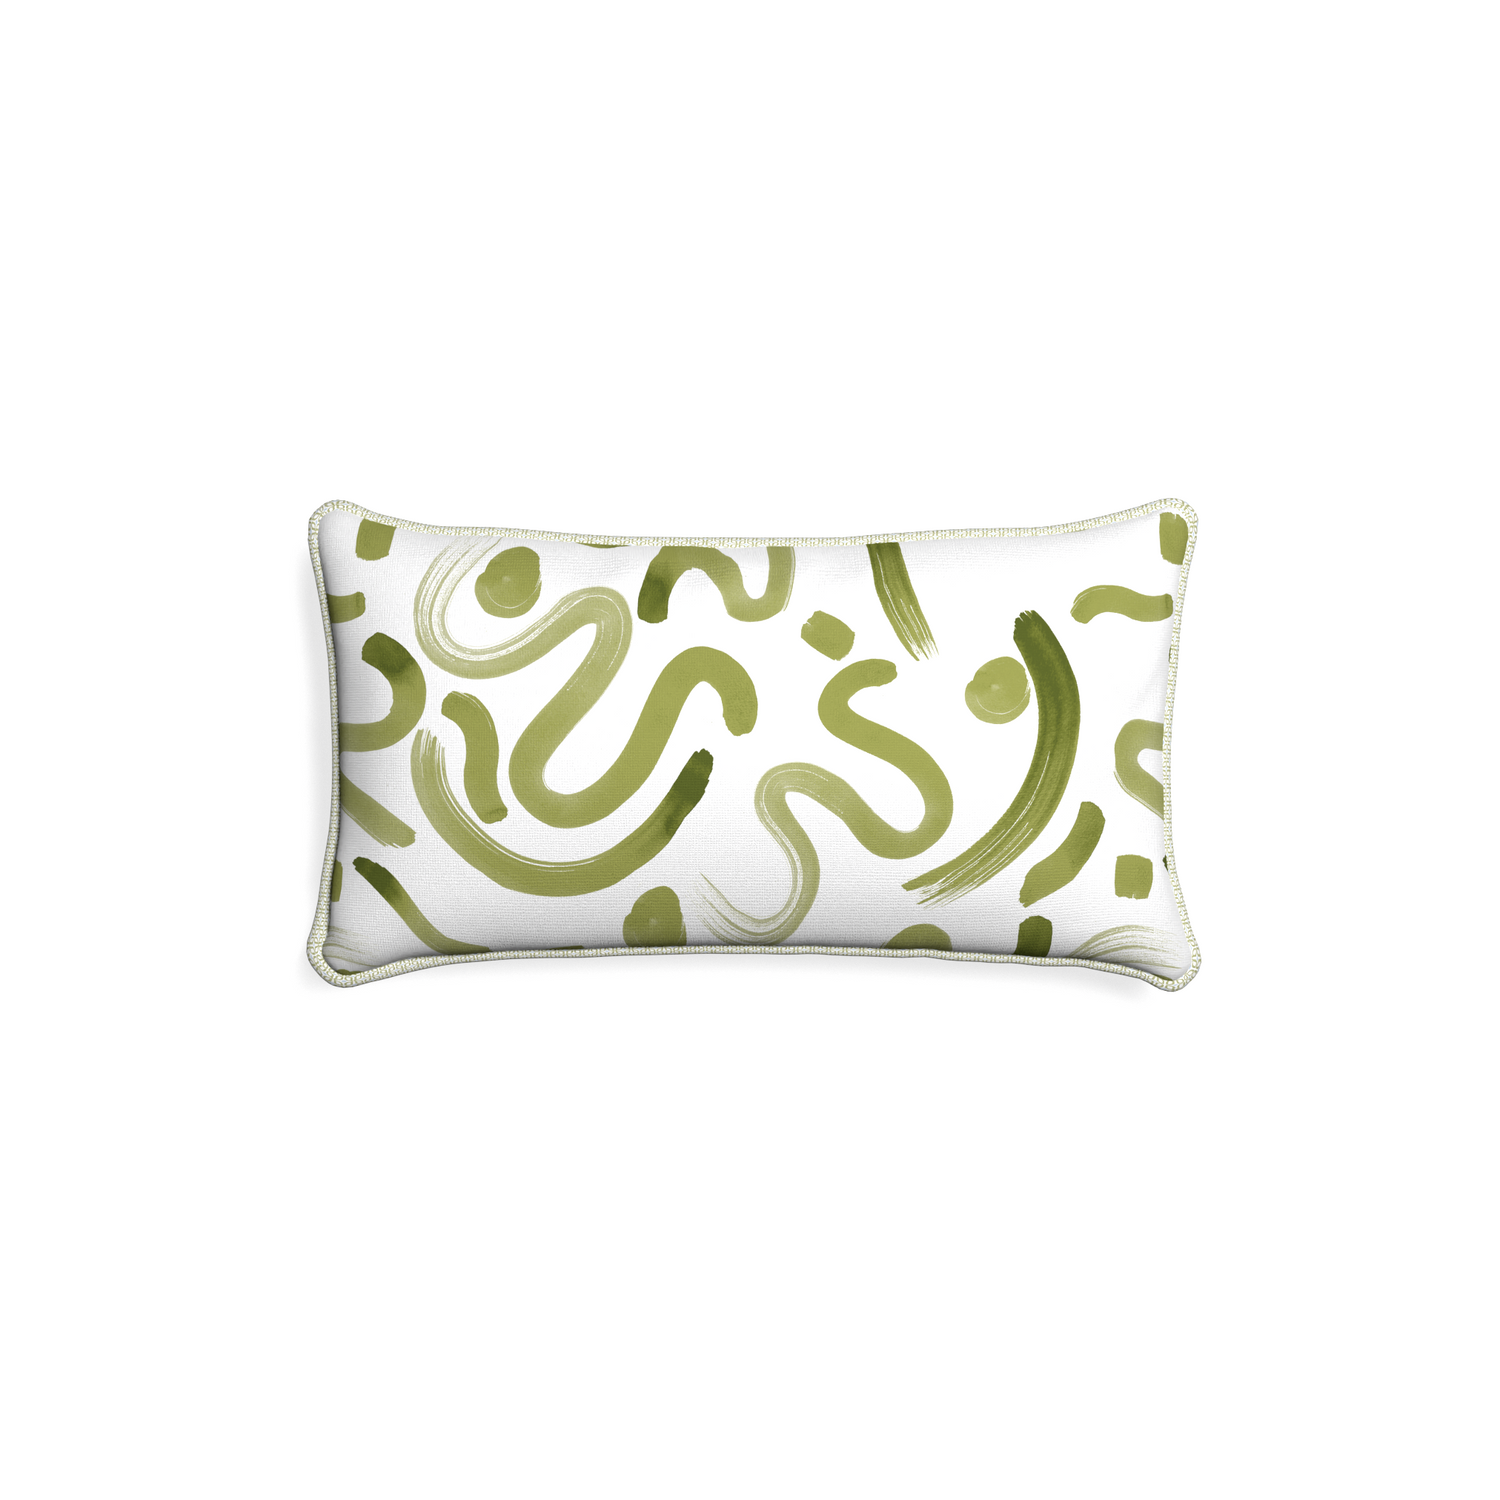 Petite-lumbar hockney moss custom moss greenpillow with l piping on white background